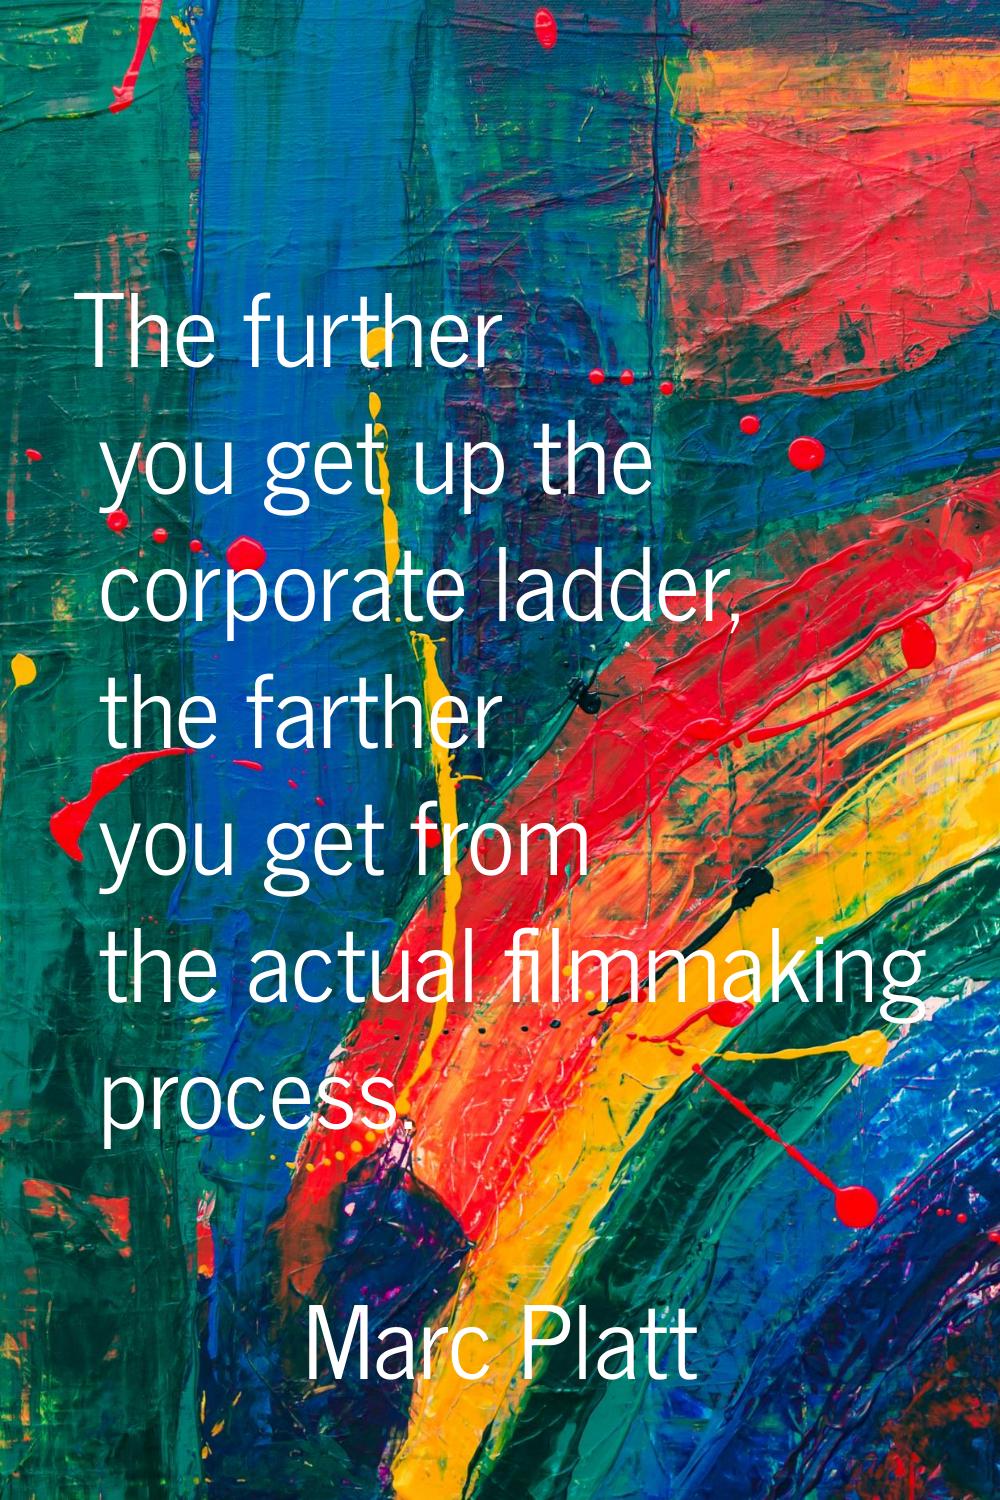 The further you get up the corporate ladder, the farther you get from the actual filmmaking process